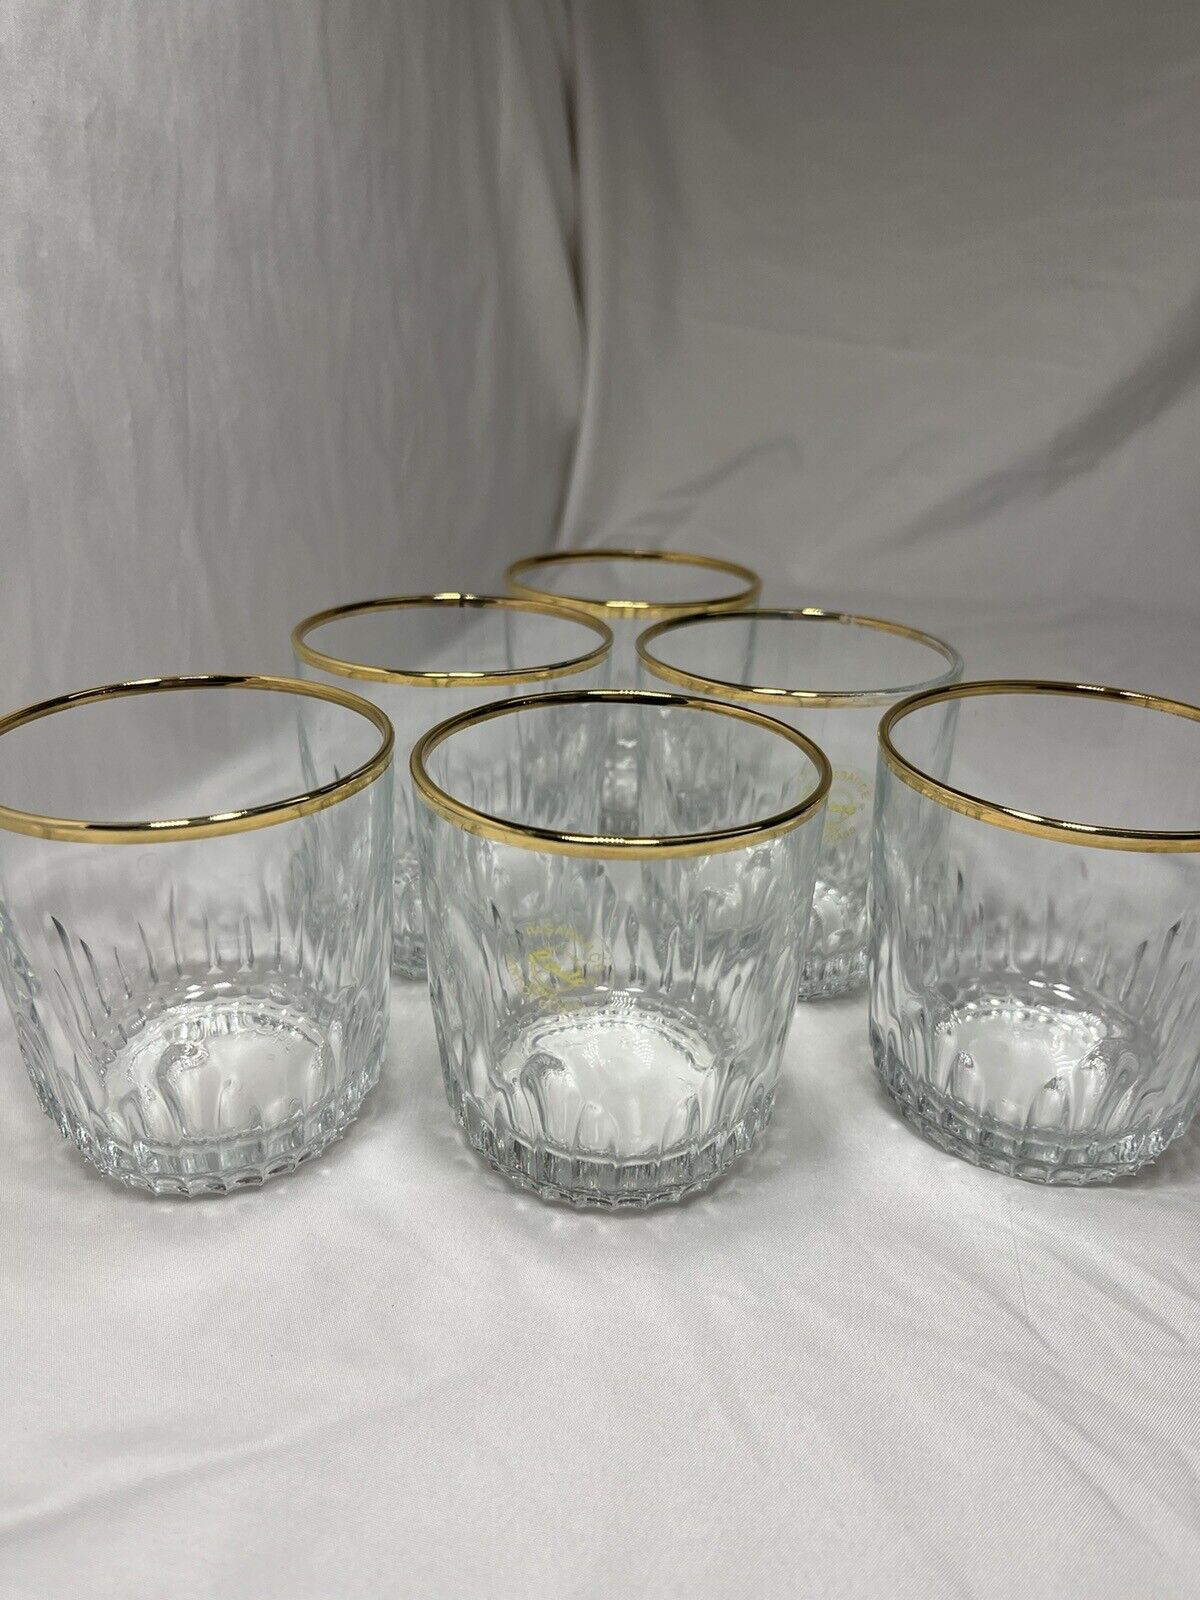 Vintage Pasabahce Turkey Whiskey Glasses with Gold Trim Set of 6